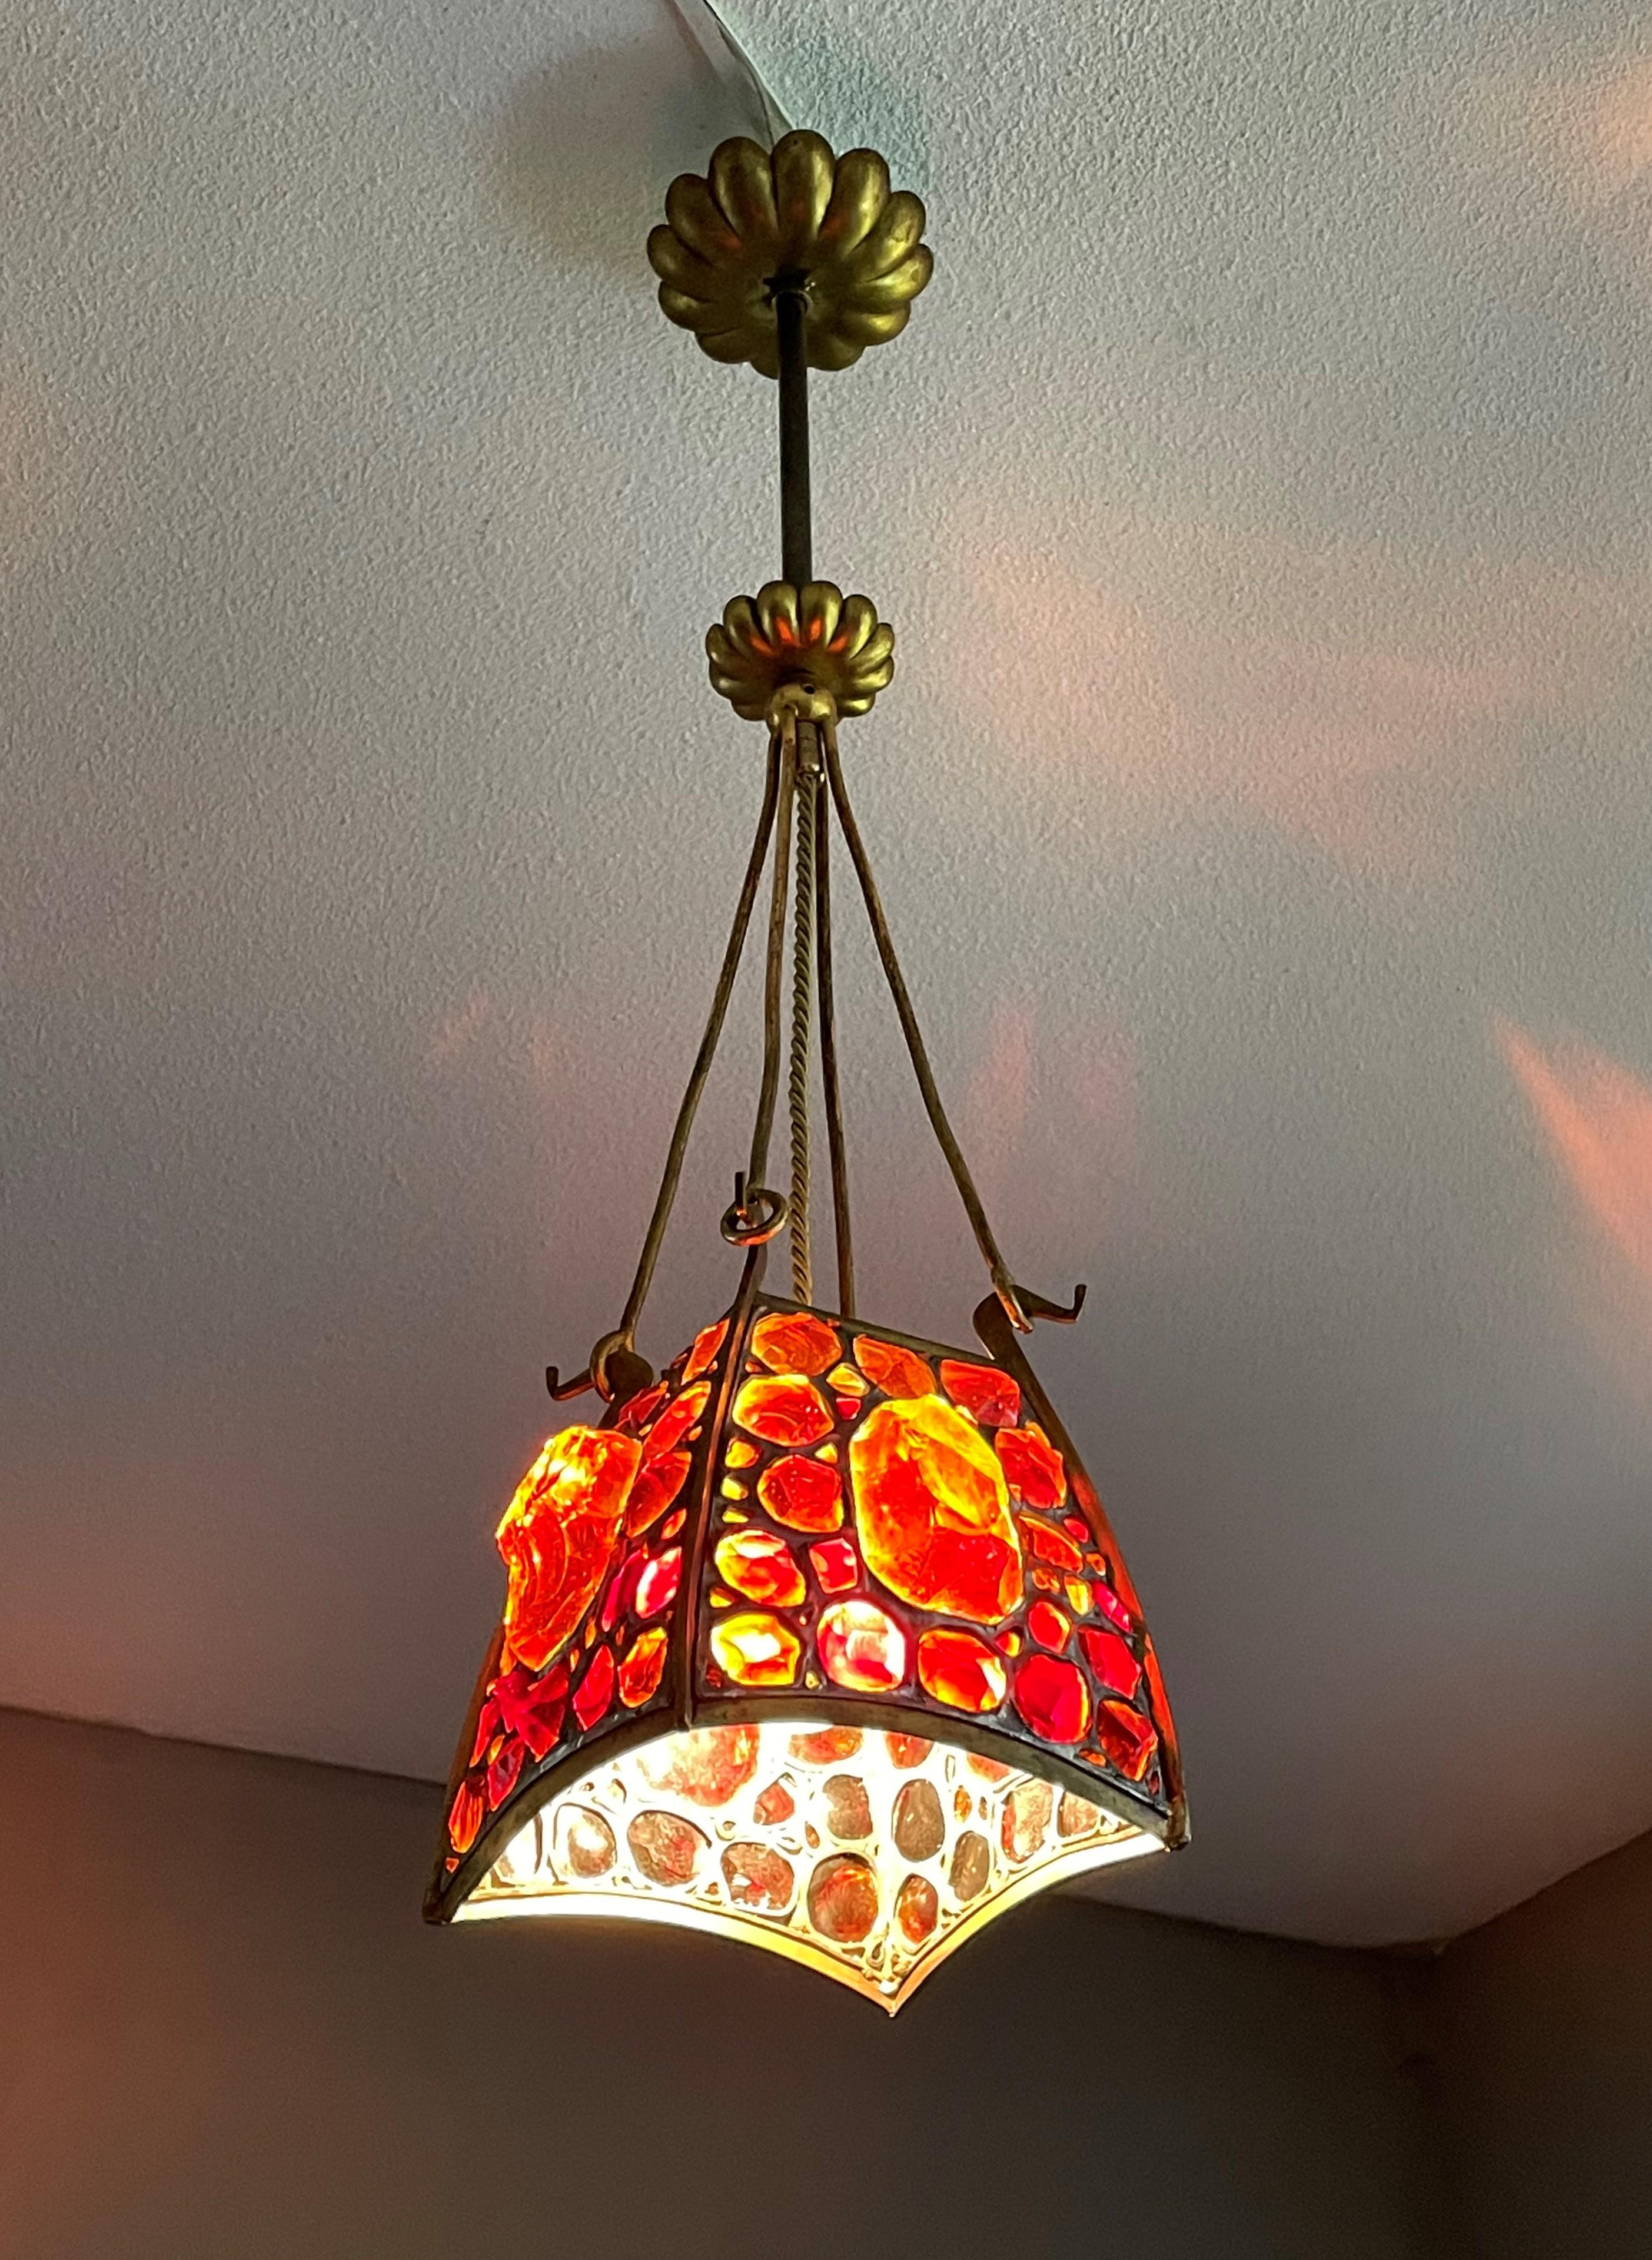 Small size, marvelous design and truly stylish Arts and Crafts pendant.

With early 20th century light fixtures being one of our specialities, finding a unique Arts and Crafts pendant always makes our heart jump. Every designer knows that getting a